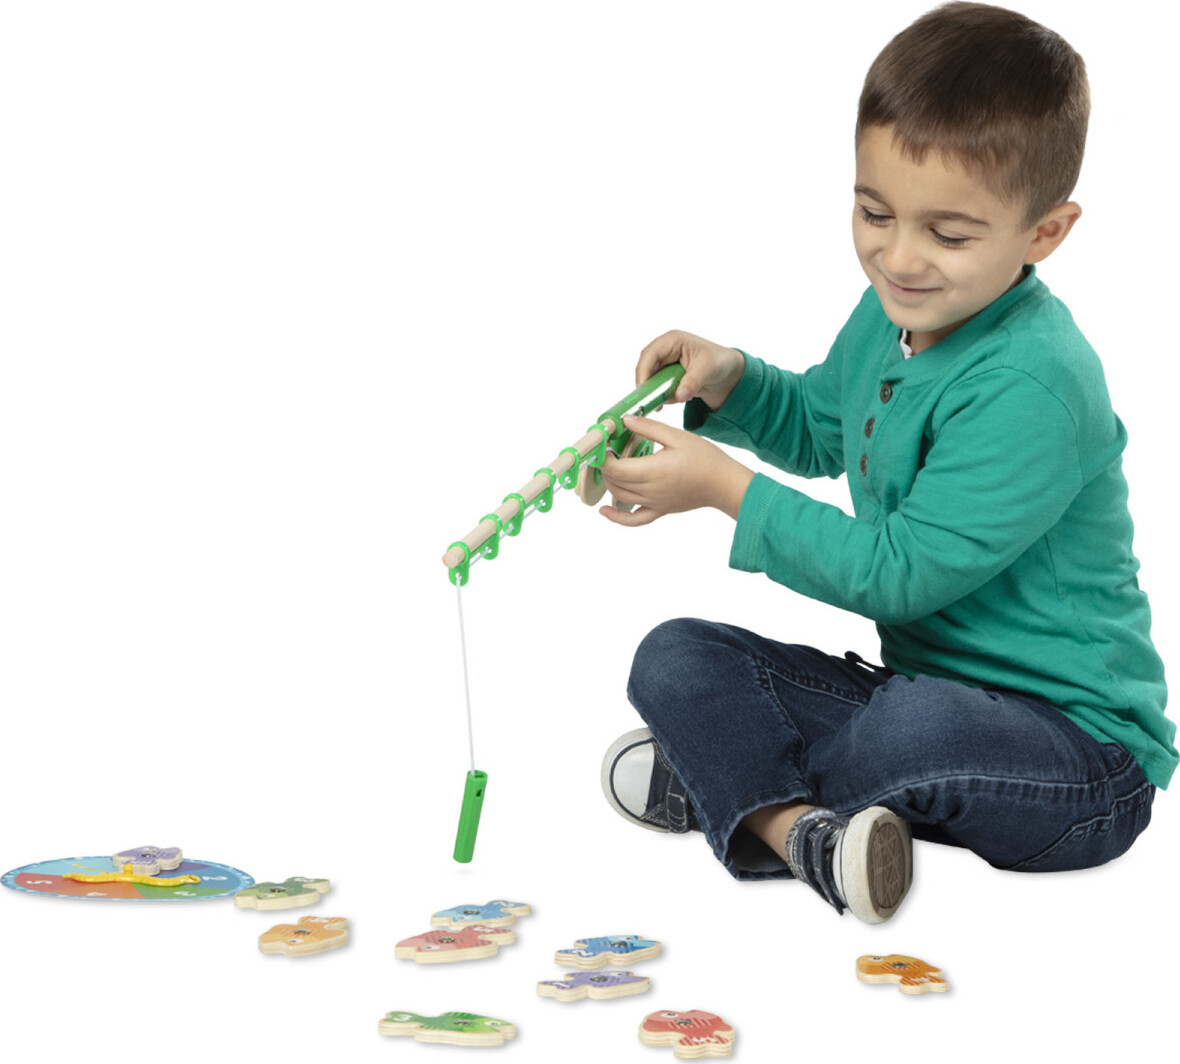 Catch and Count Fishing Game - Fun Stuff Toys